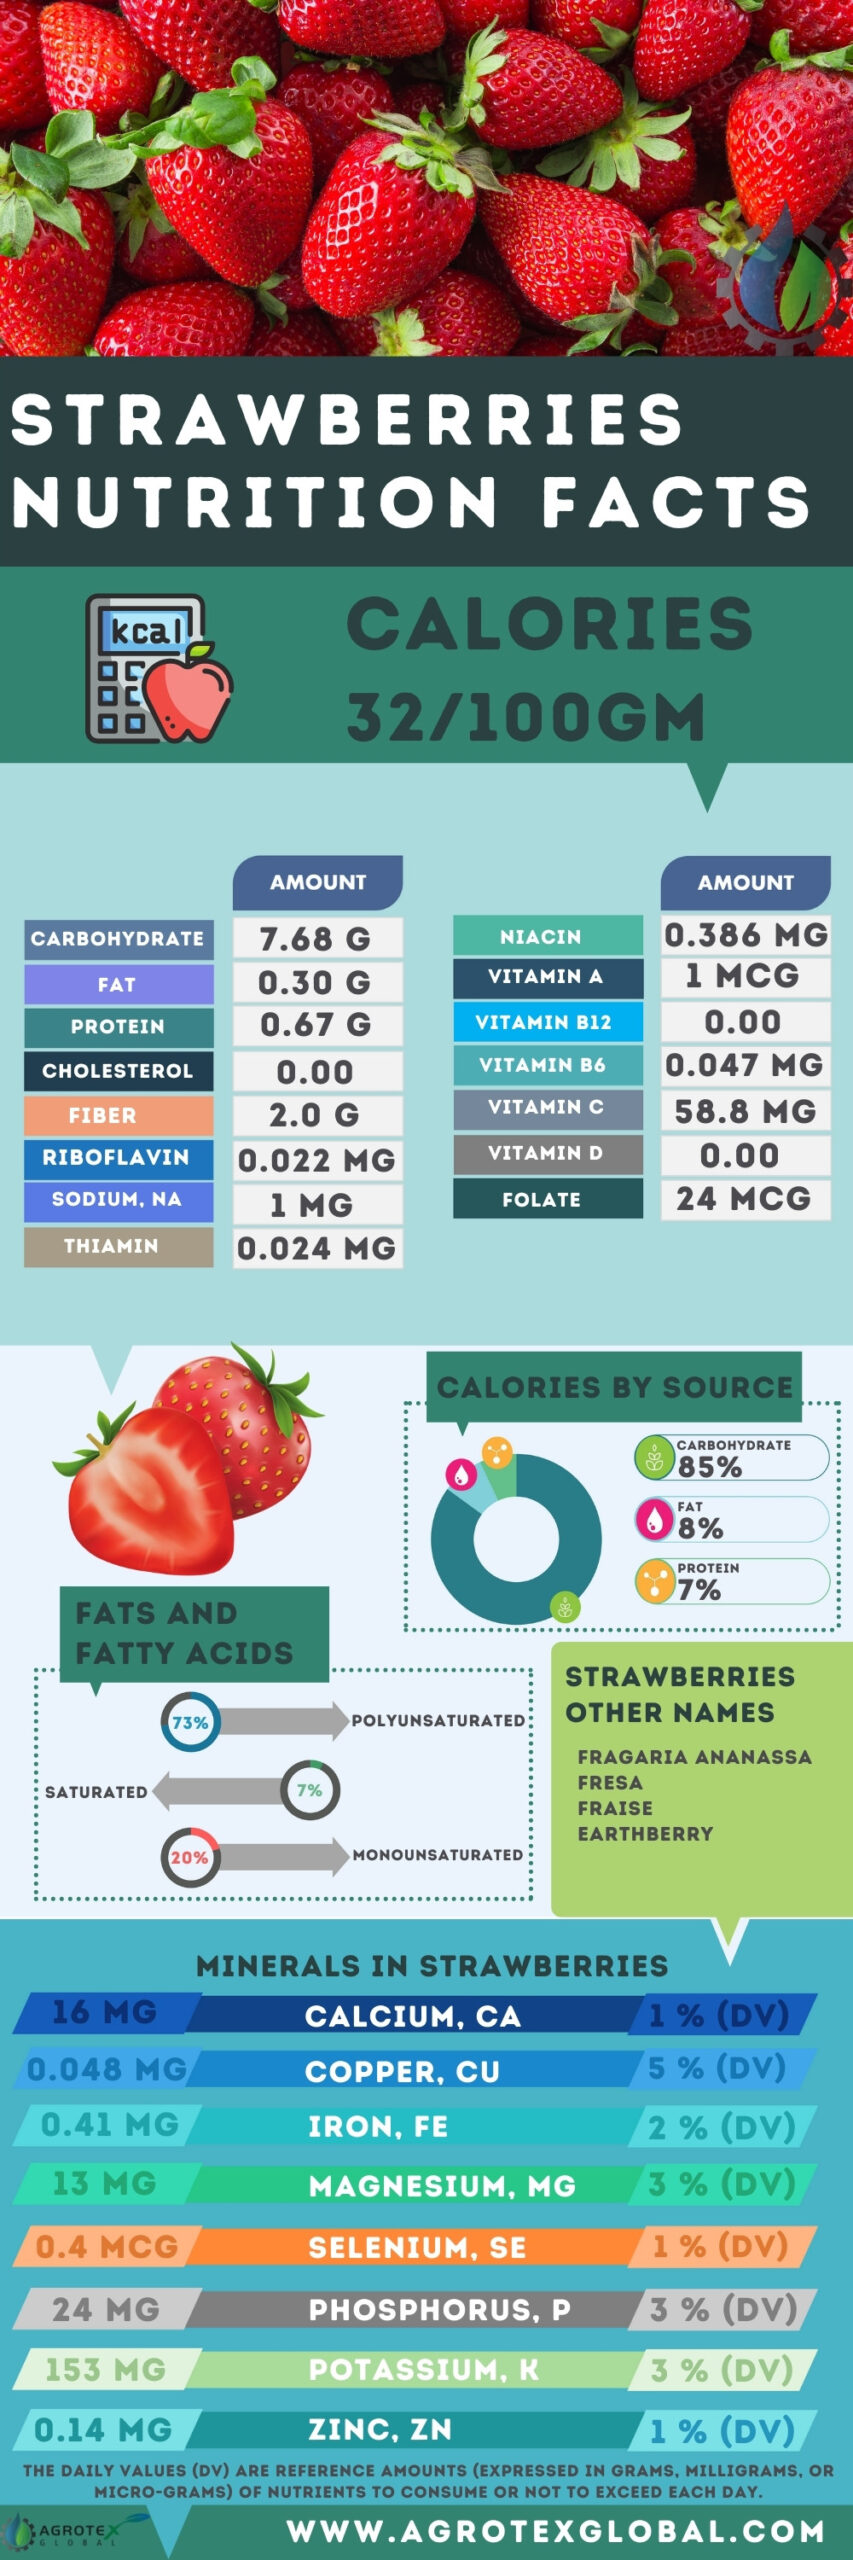 Strawberries NUTRITION FACTS calorie chart infographic